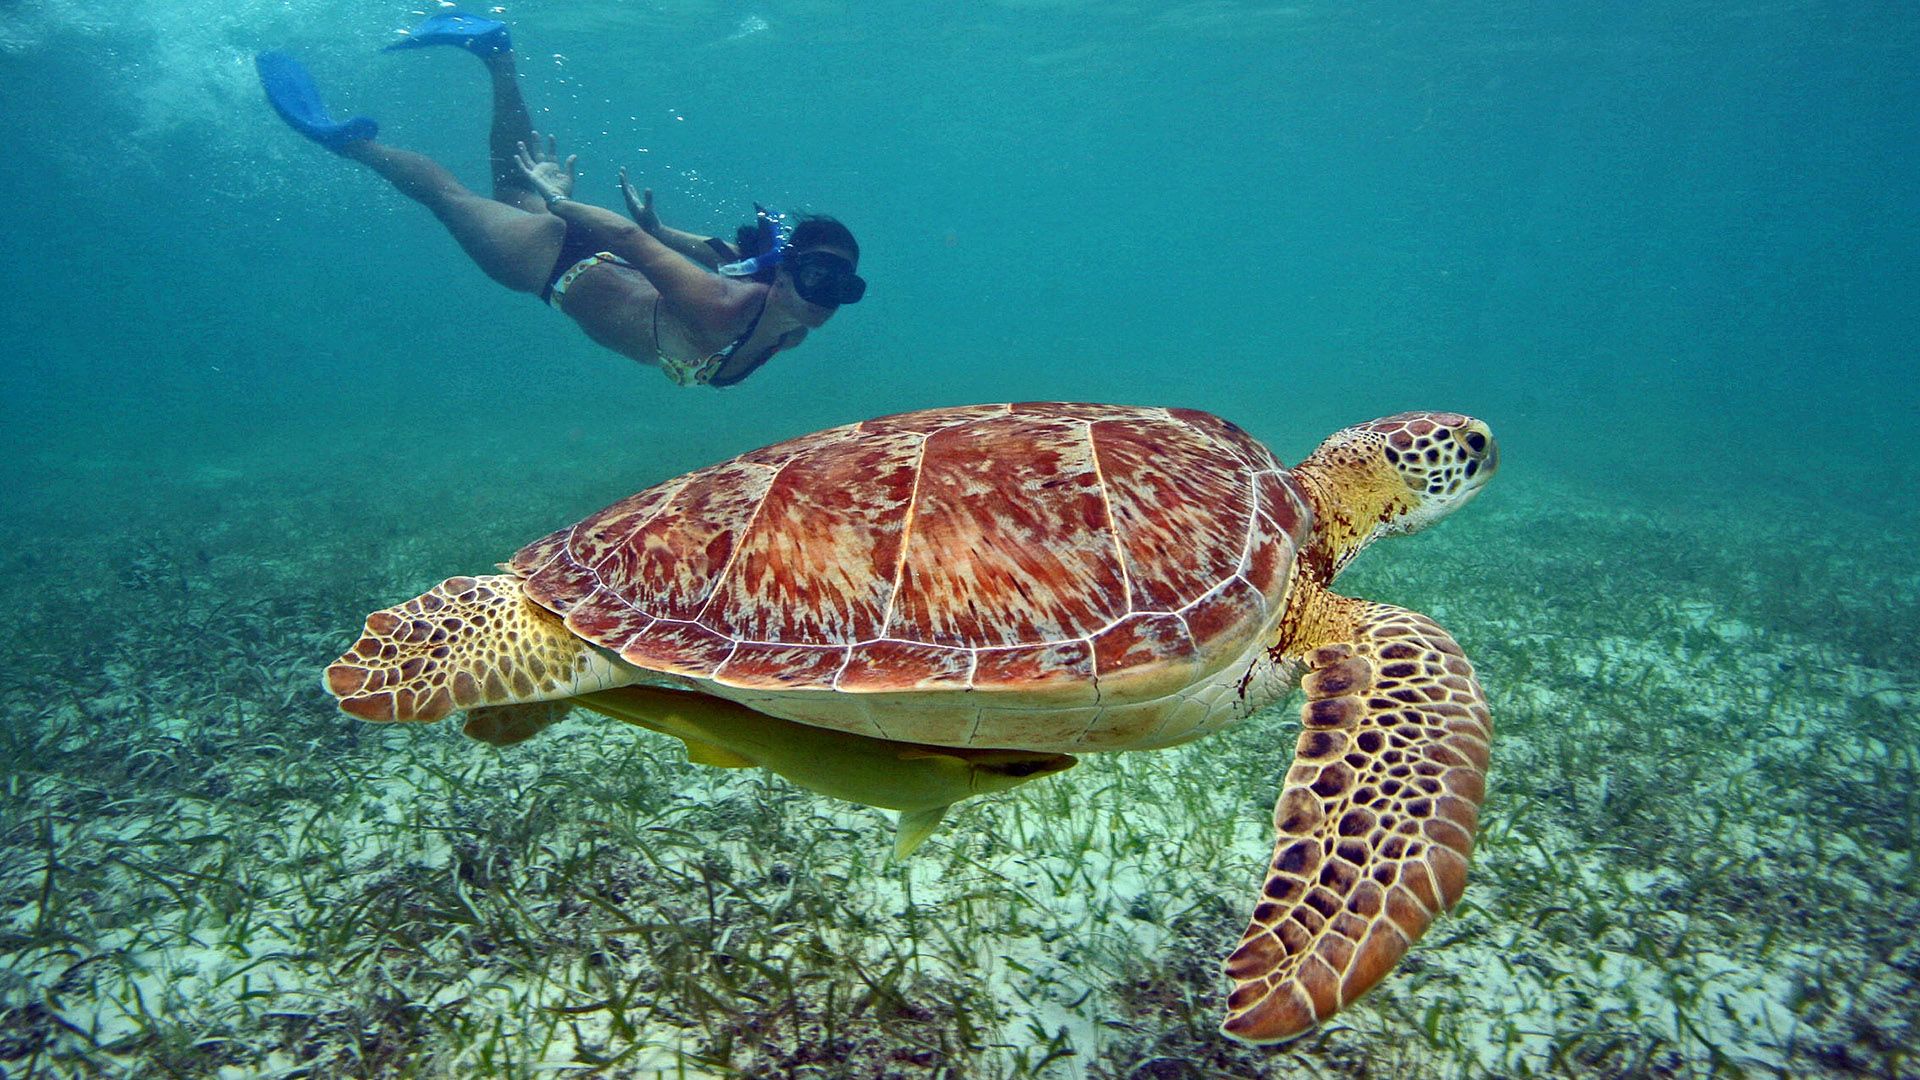 Diving with sea turtles in Cozumel Mexico